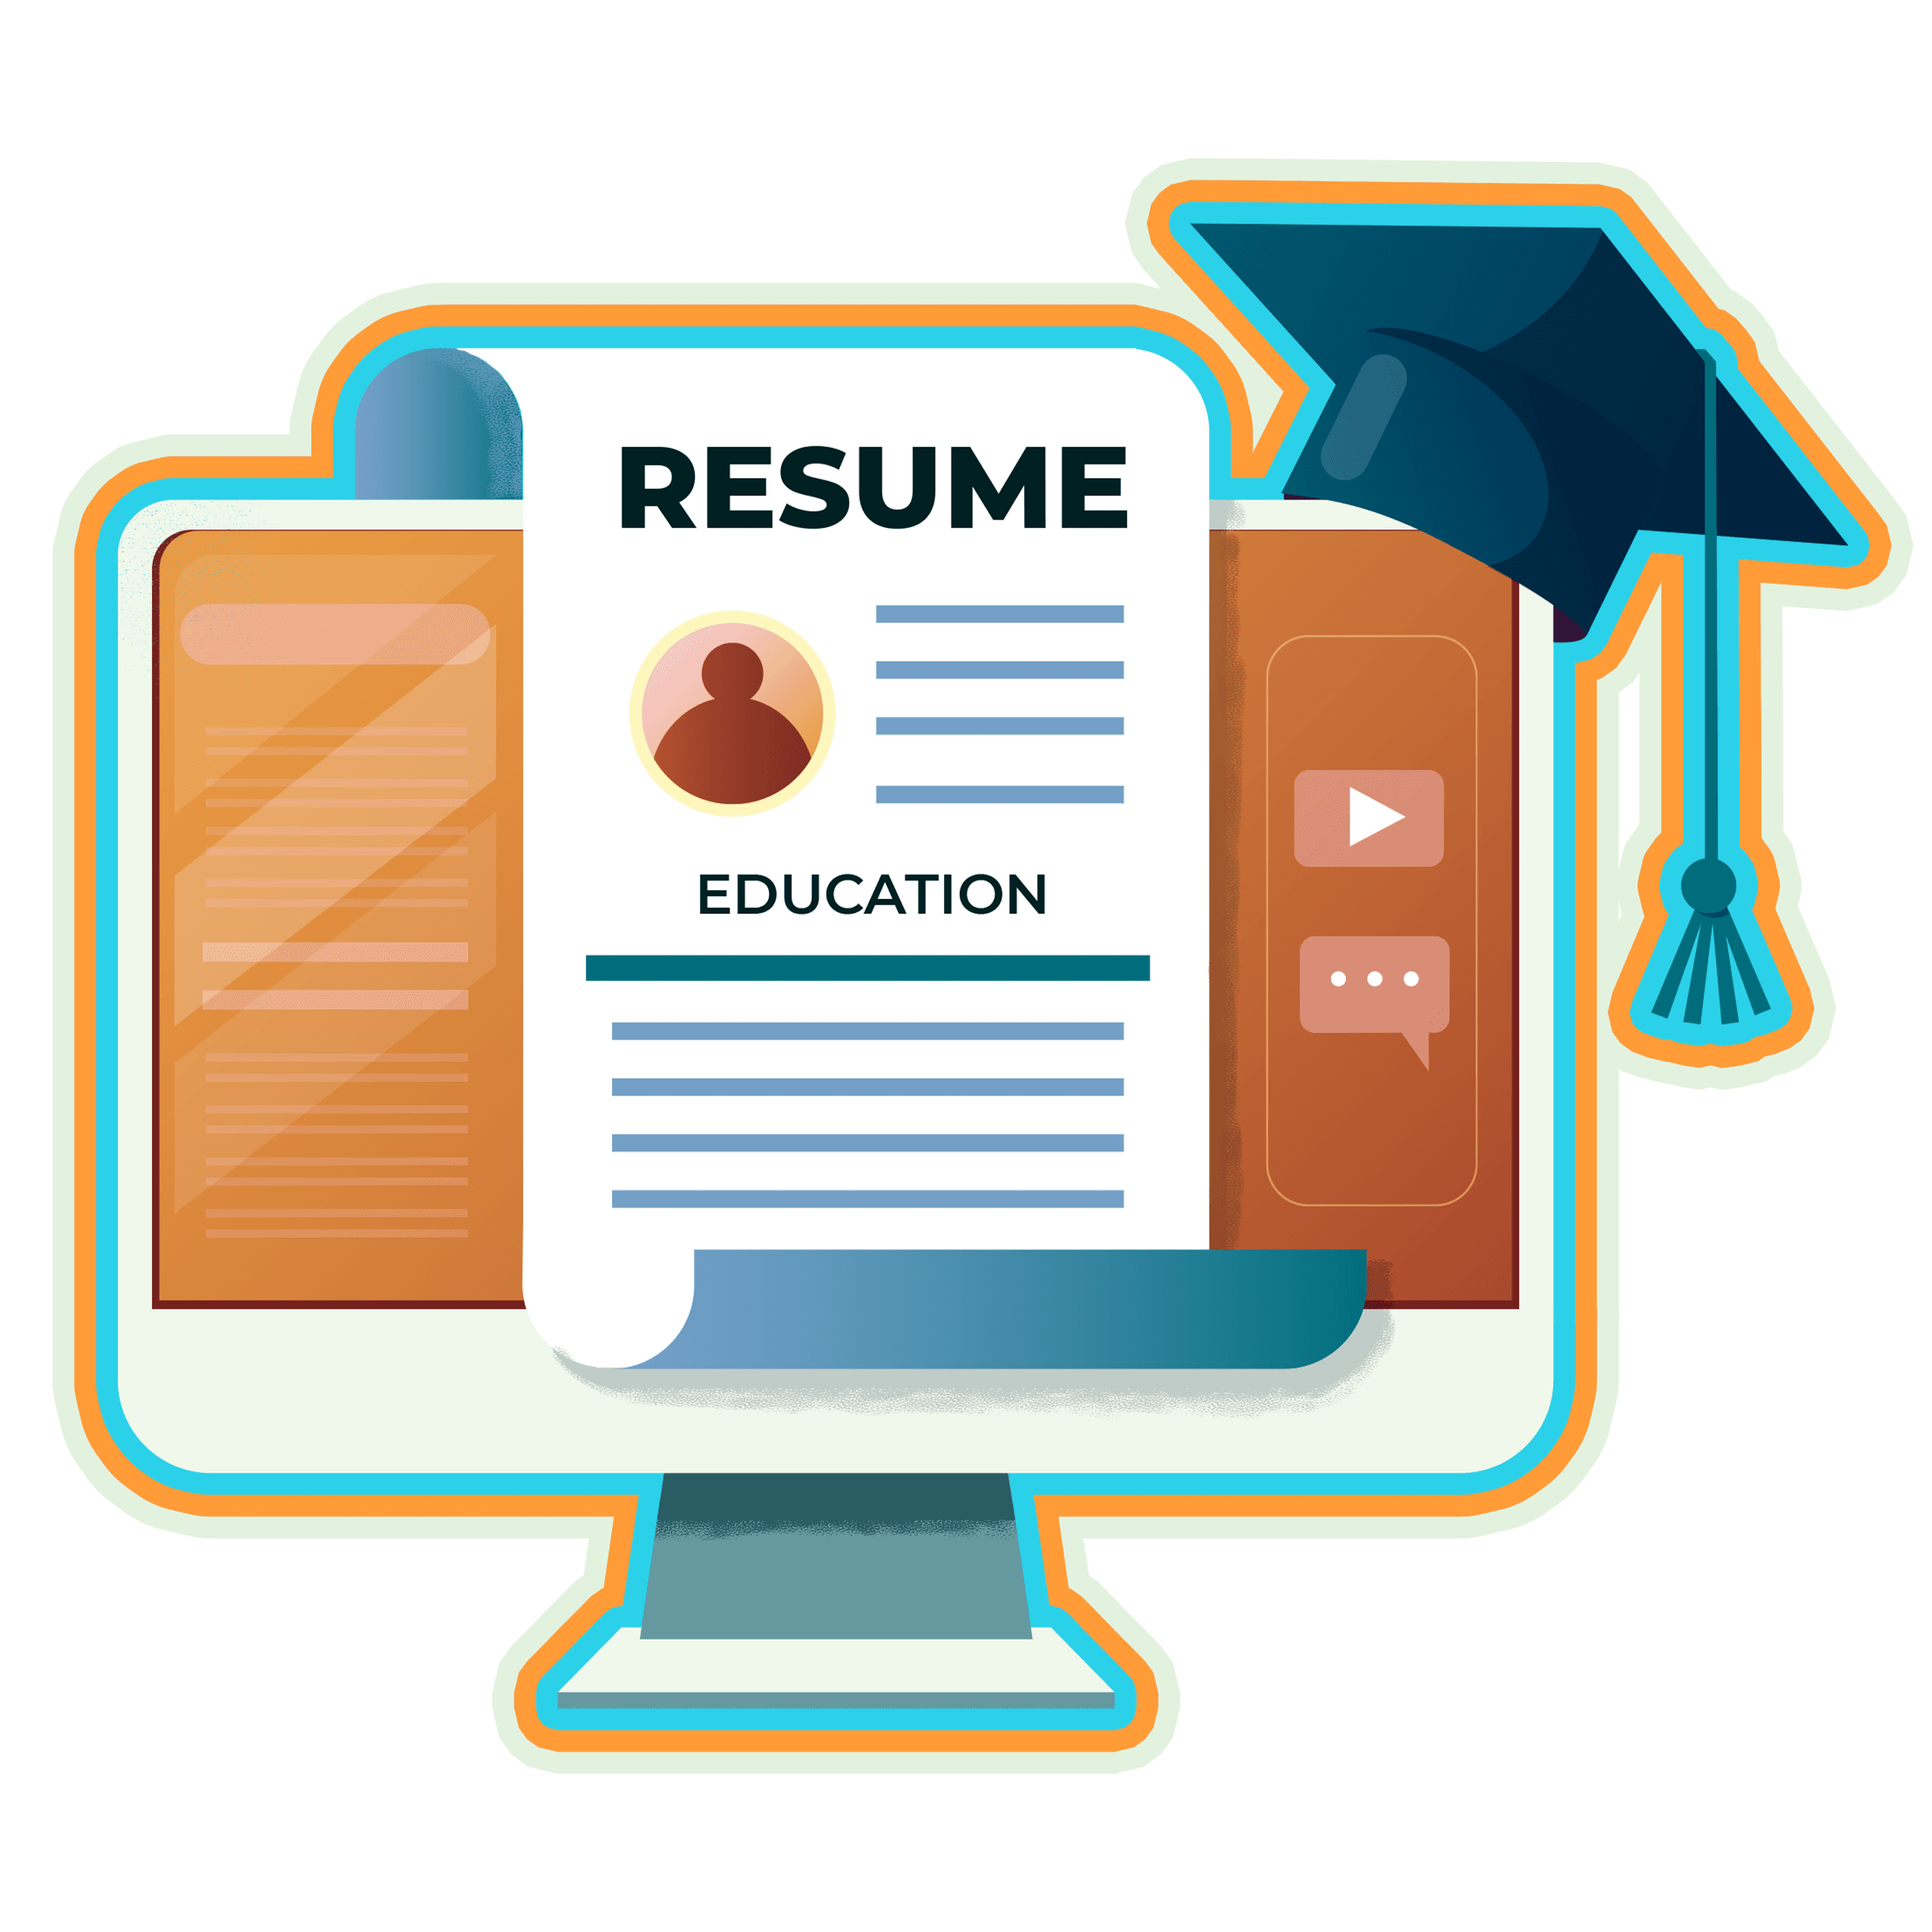 How To List Education On Resume:  Section Examples & Writing Guide